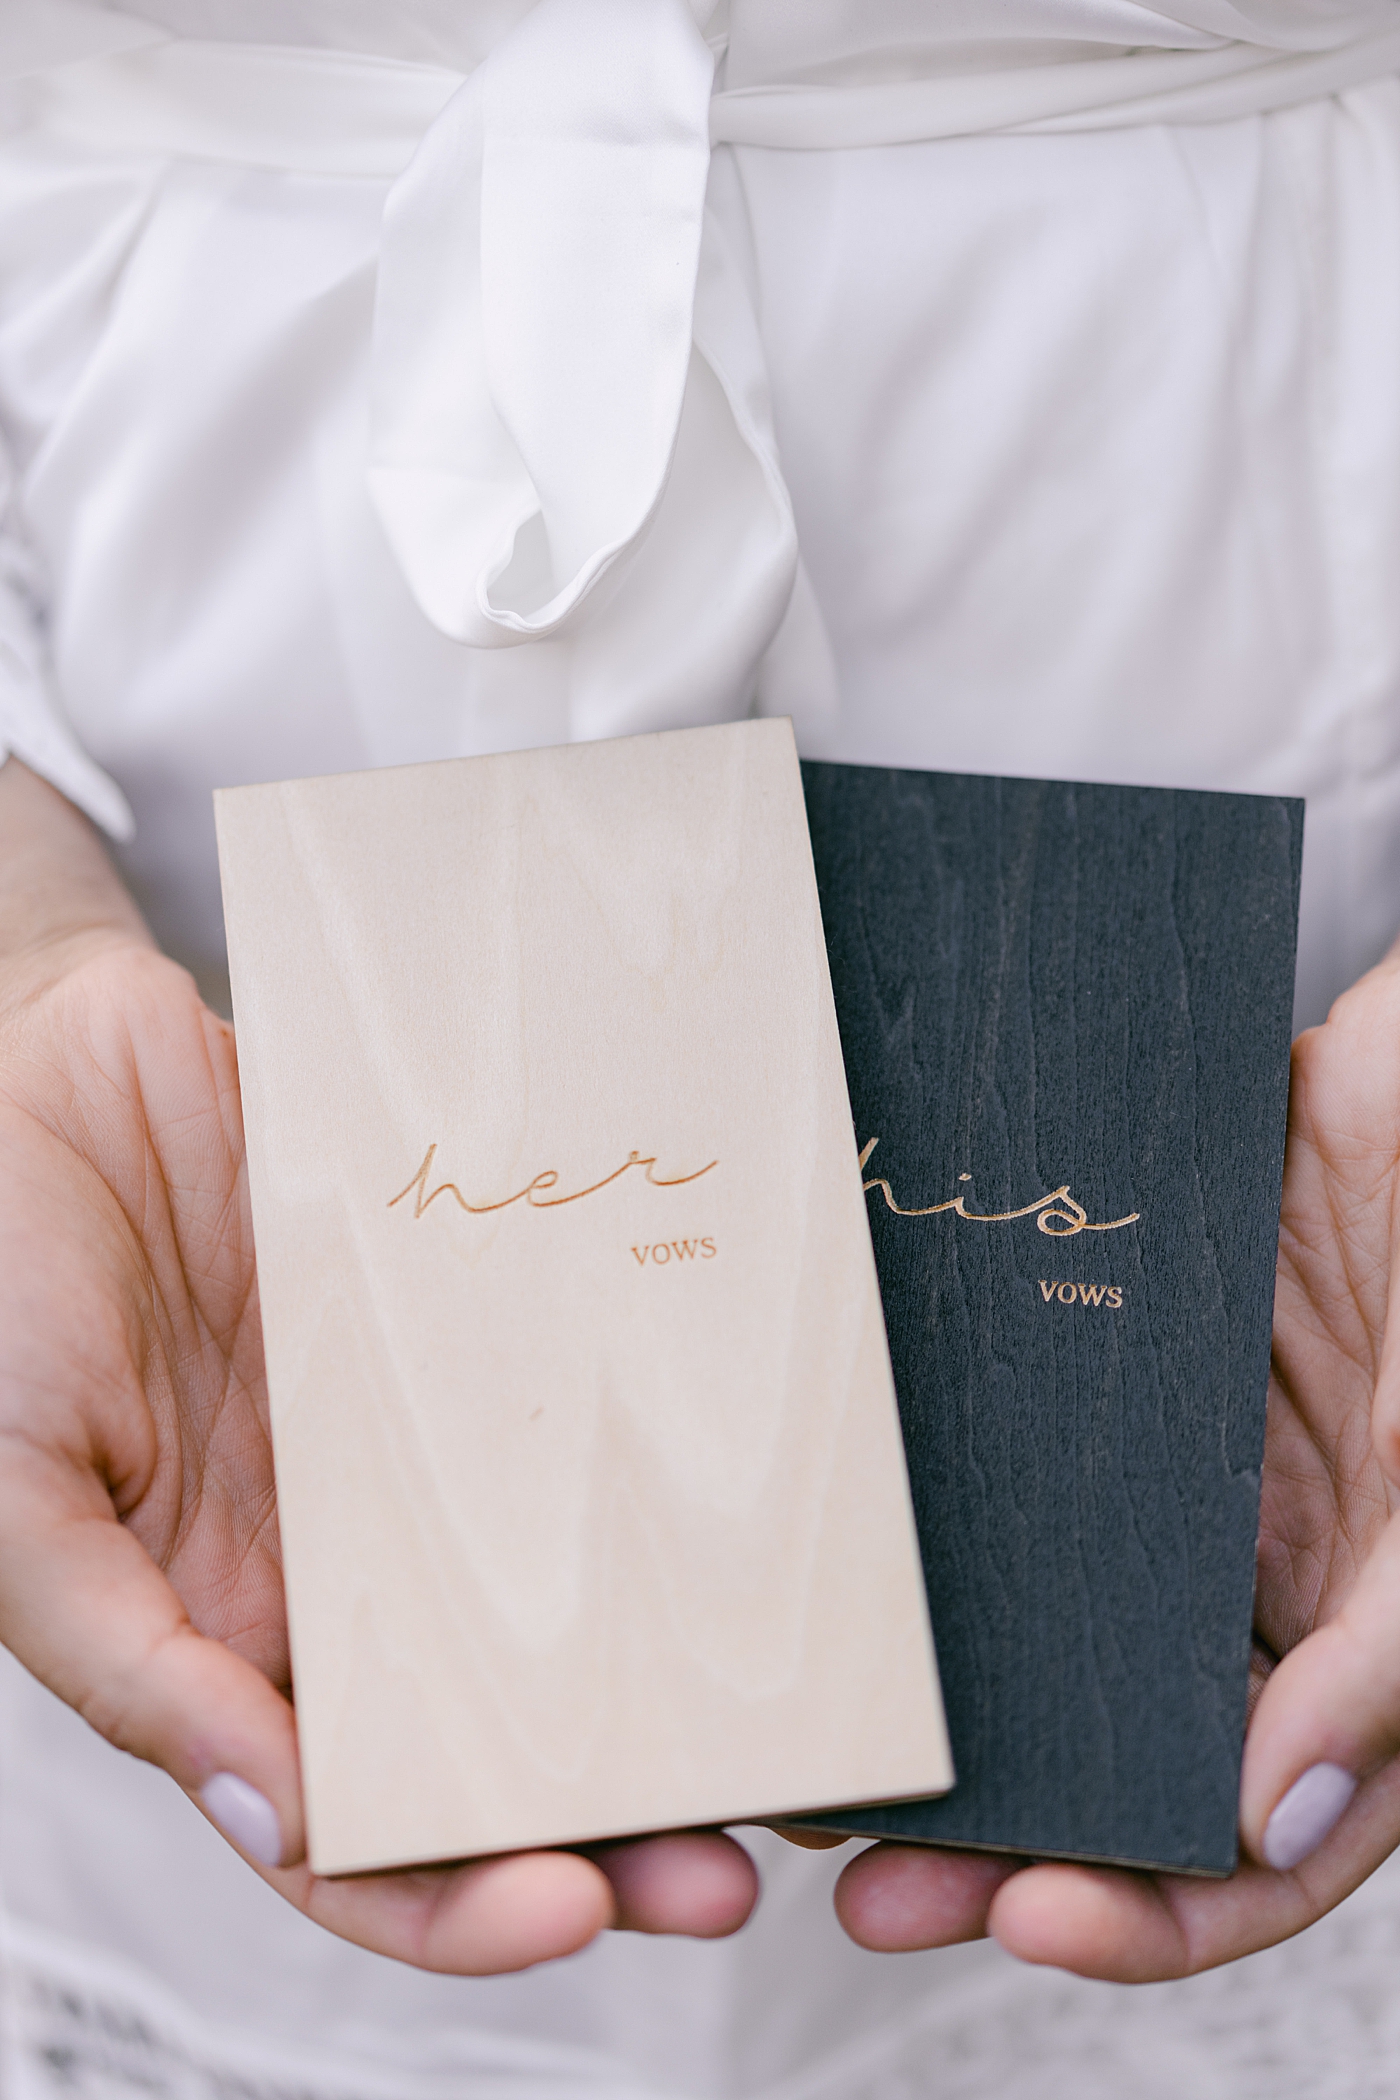 Personalized vow books | Photo by Hope Helmuth Photography